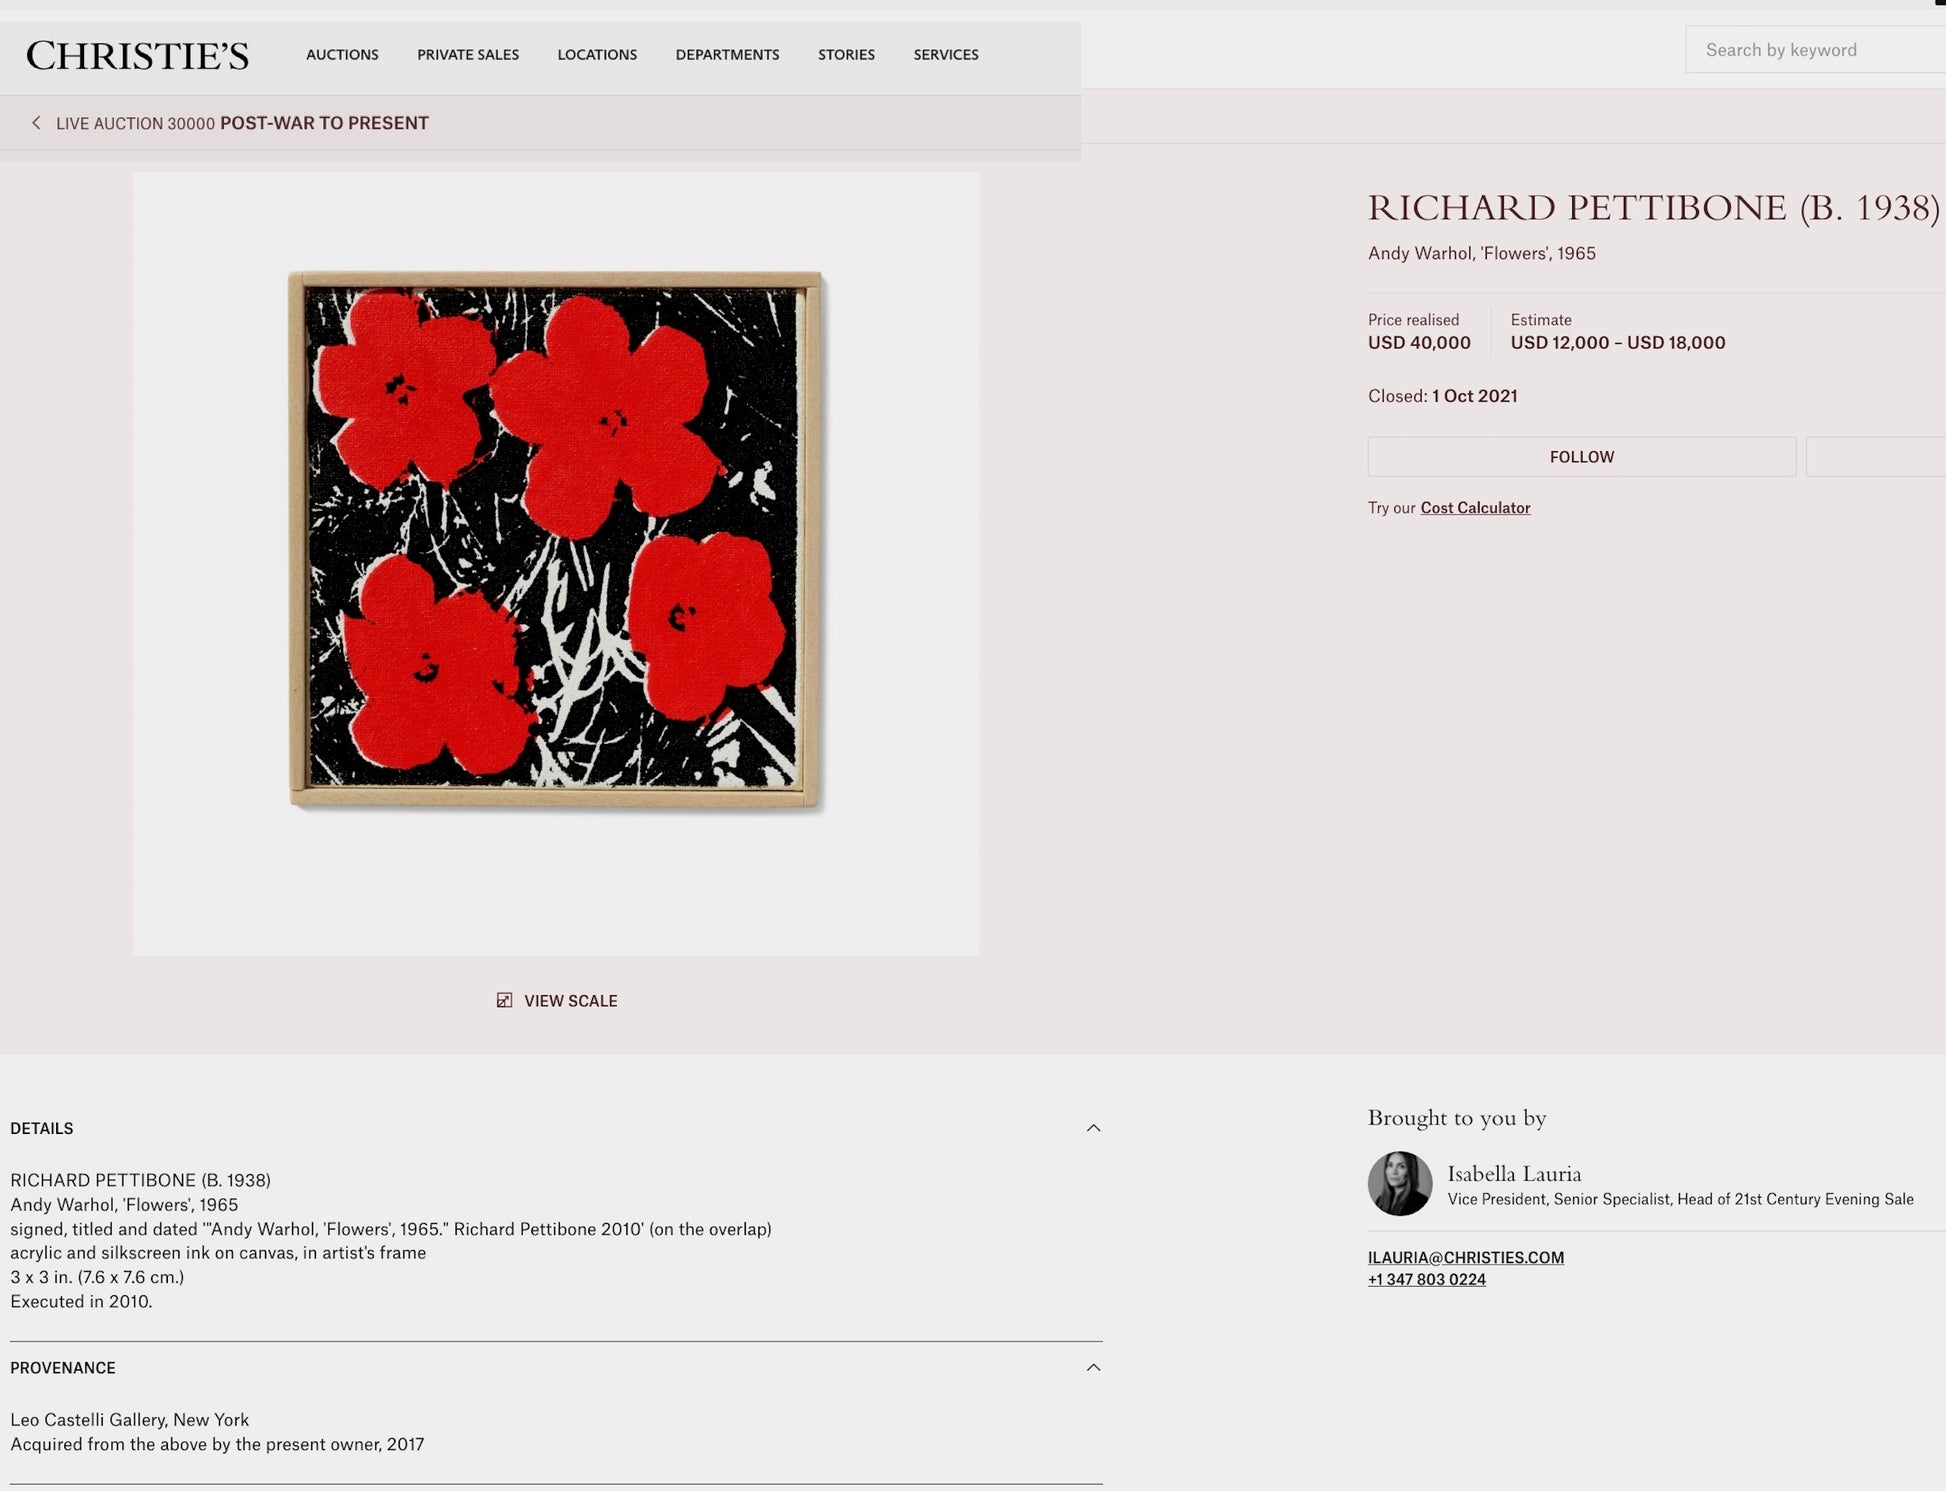 Richard Pettibone Flowers Paintting sold for $40,000 at Christie's New York